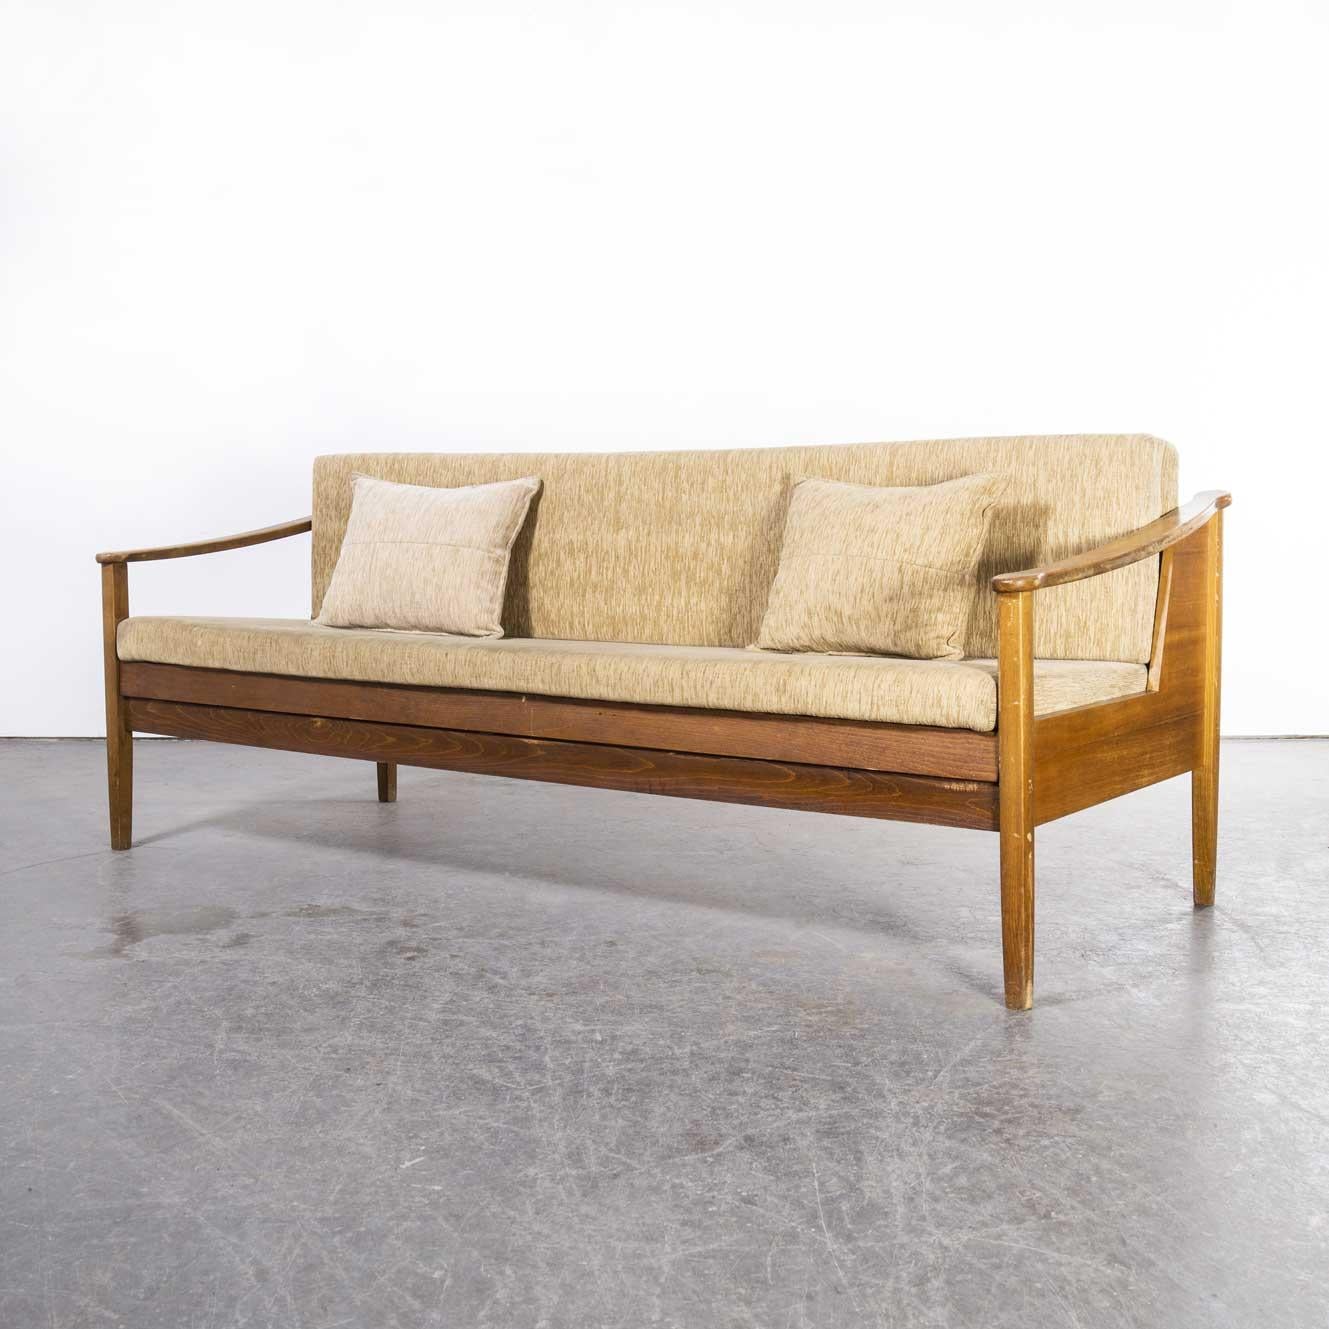 1970’s original mid century Sapele frame sofa – sofabed
1970’s original mid century Sapele frame sofa – sofabed. Beautiful simple and classic mid century sofa sourced in the Czech Republic. The frame is sapele and birch wood and is original